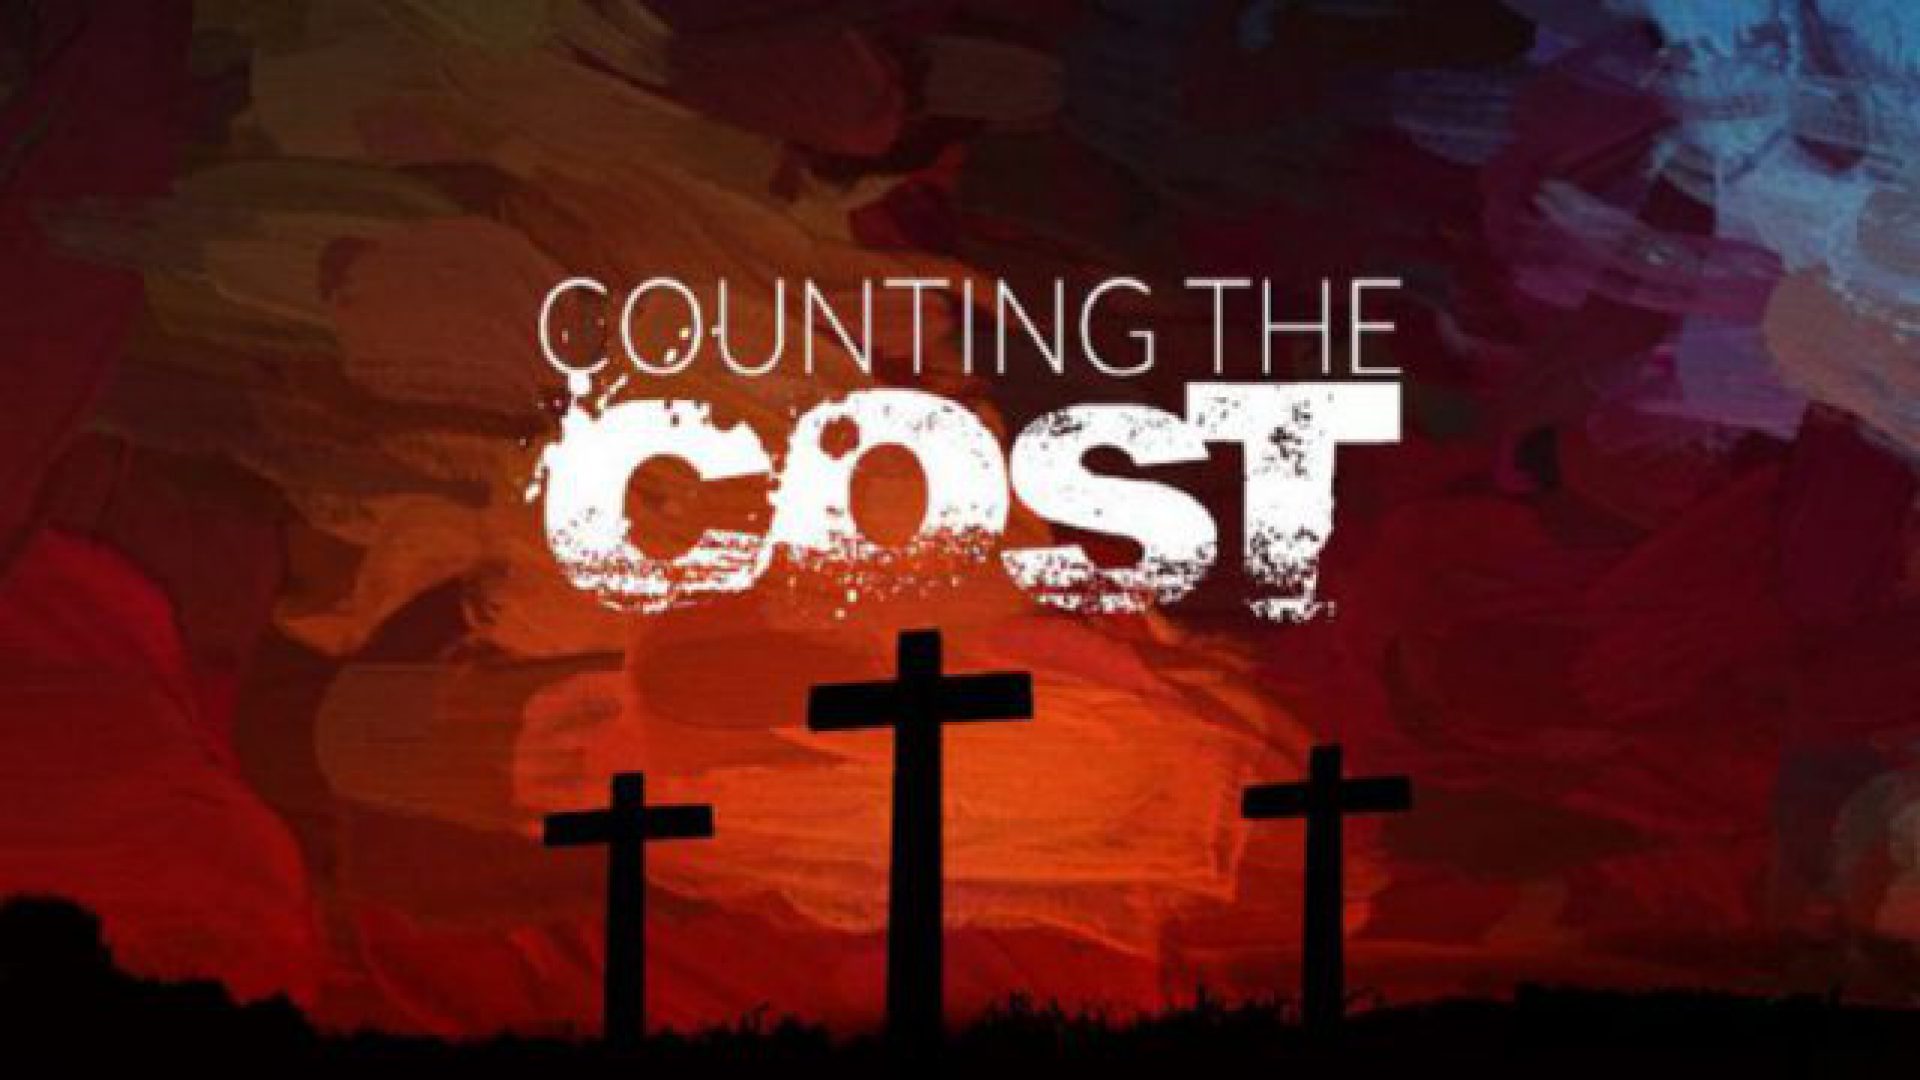 COUNTING THE COST